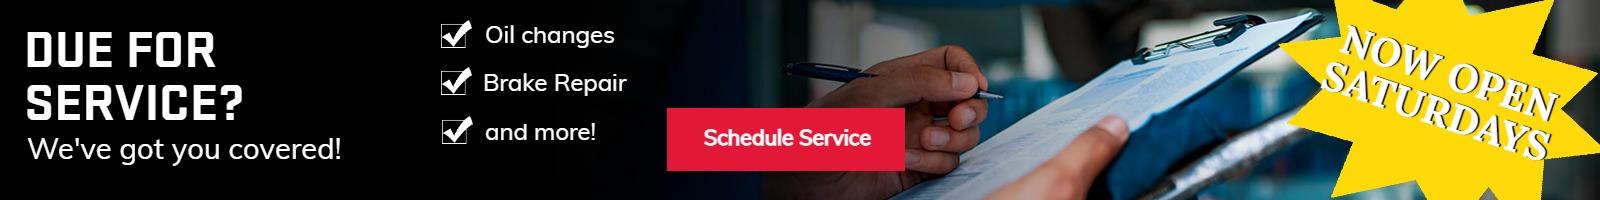 Schedule Service at Caposio Buick GMC